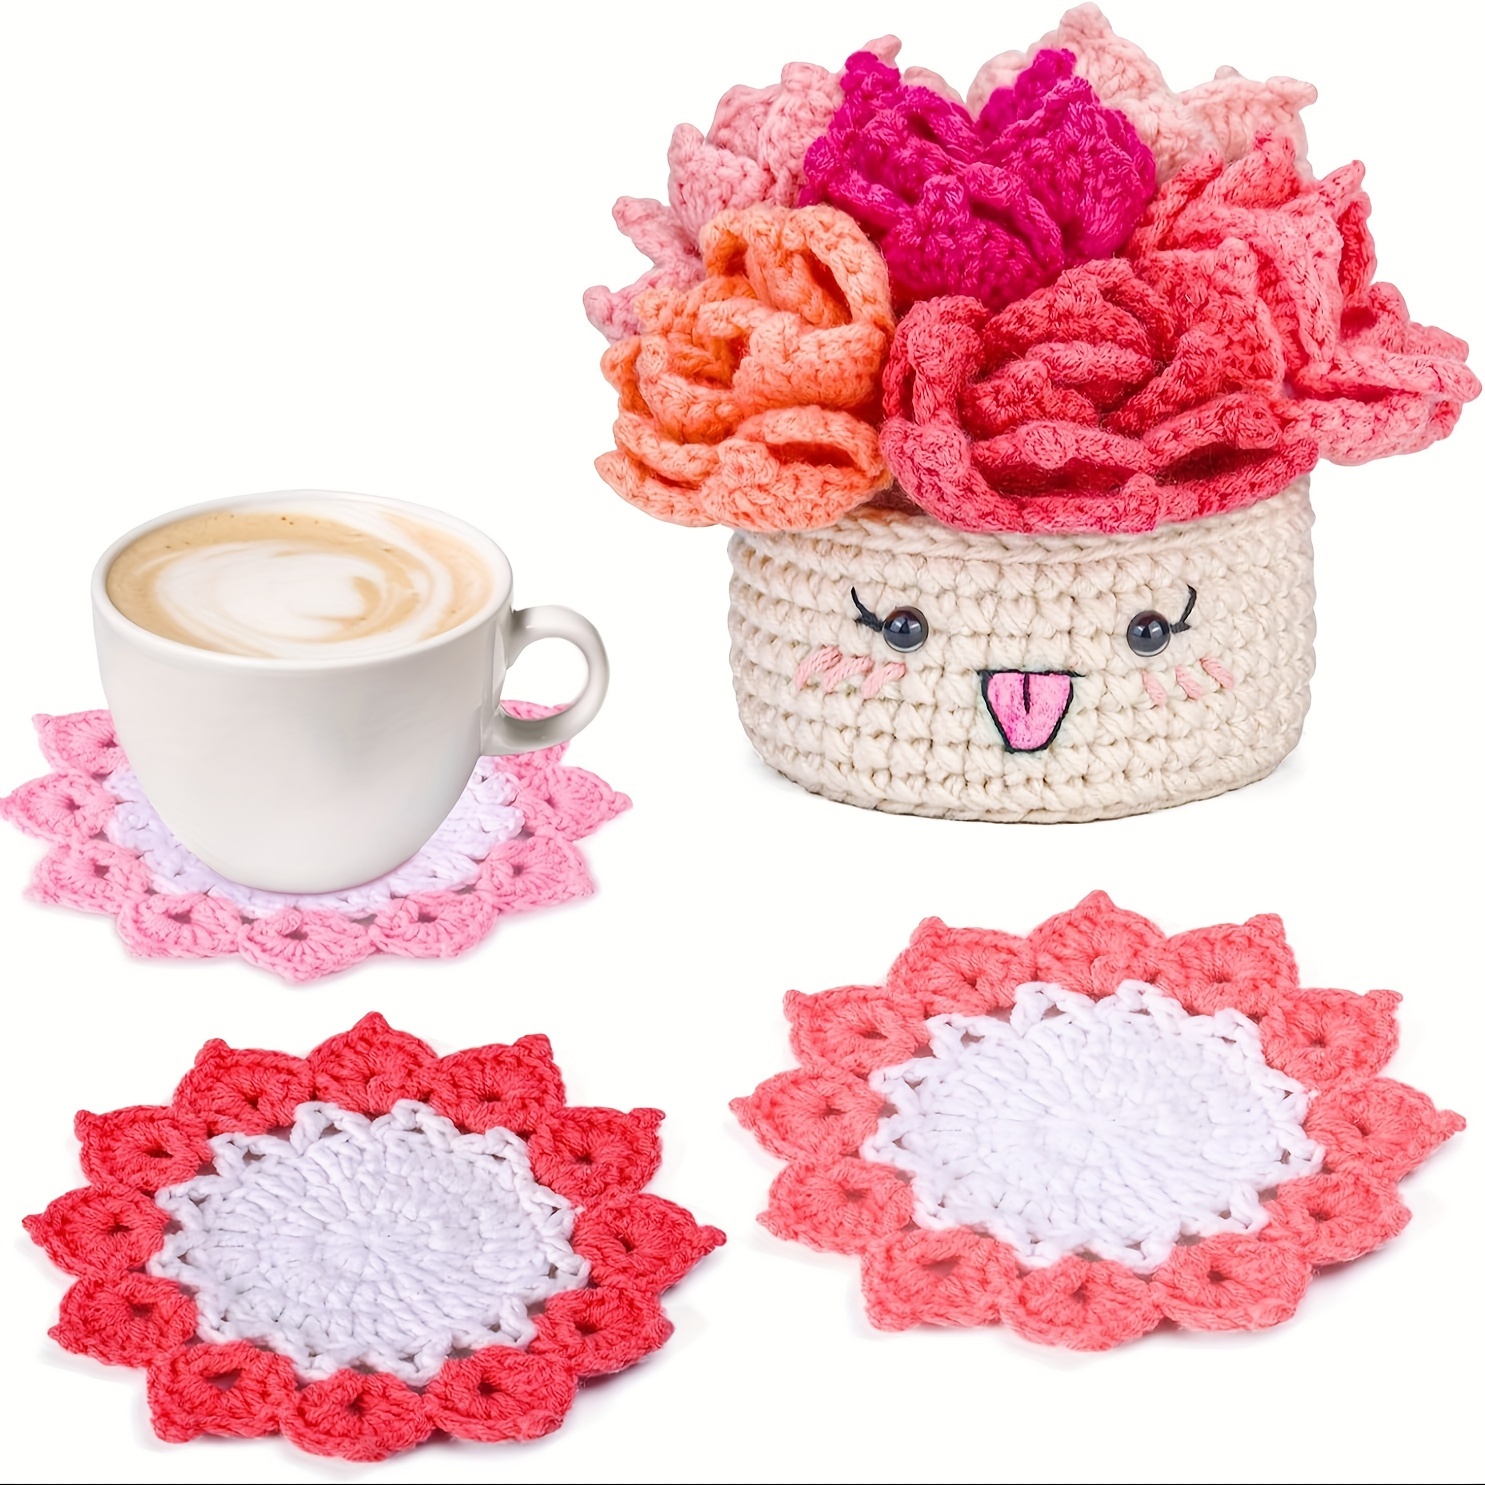 

6pcs Crochet Starter Kit, Potted Plant Coasters Crochet Kit With Step-by-step Video Tutorials, Crochet Hooks, Learn To Crochet Kits For Adults, Crochet Kit For Beginners,